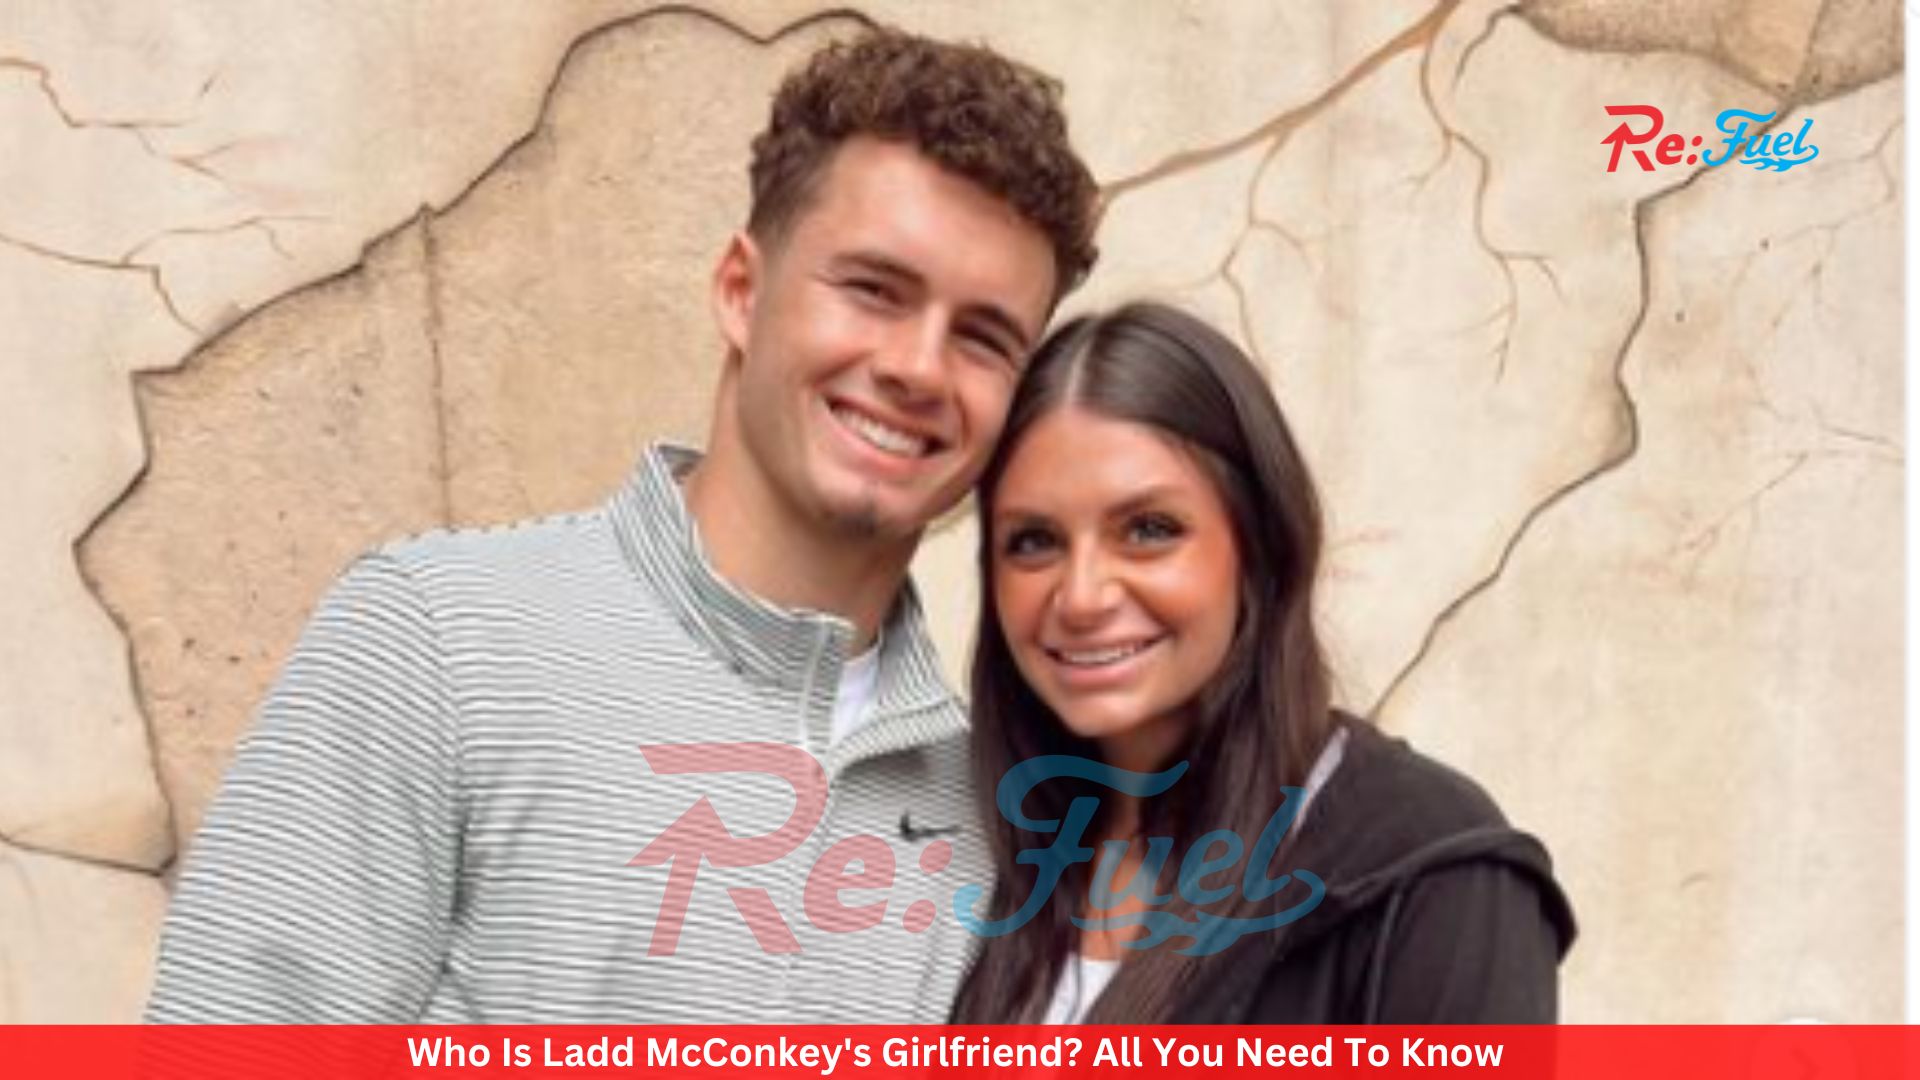 Who Is Ladd McConkey's Girlfriend? All You Need To Know